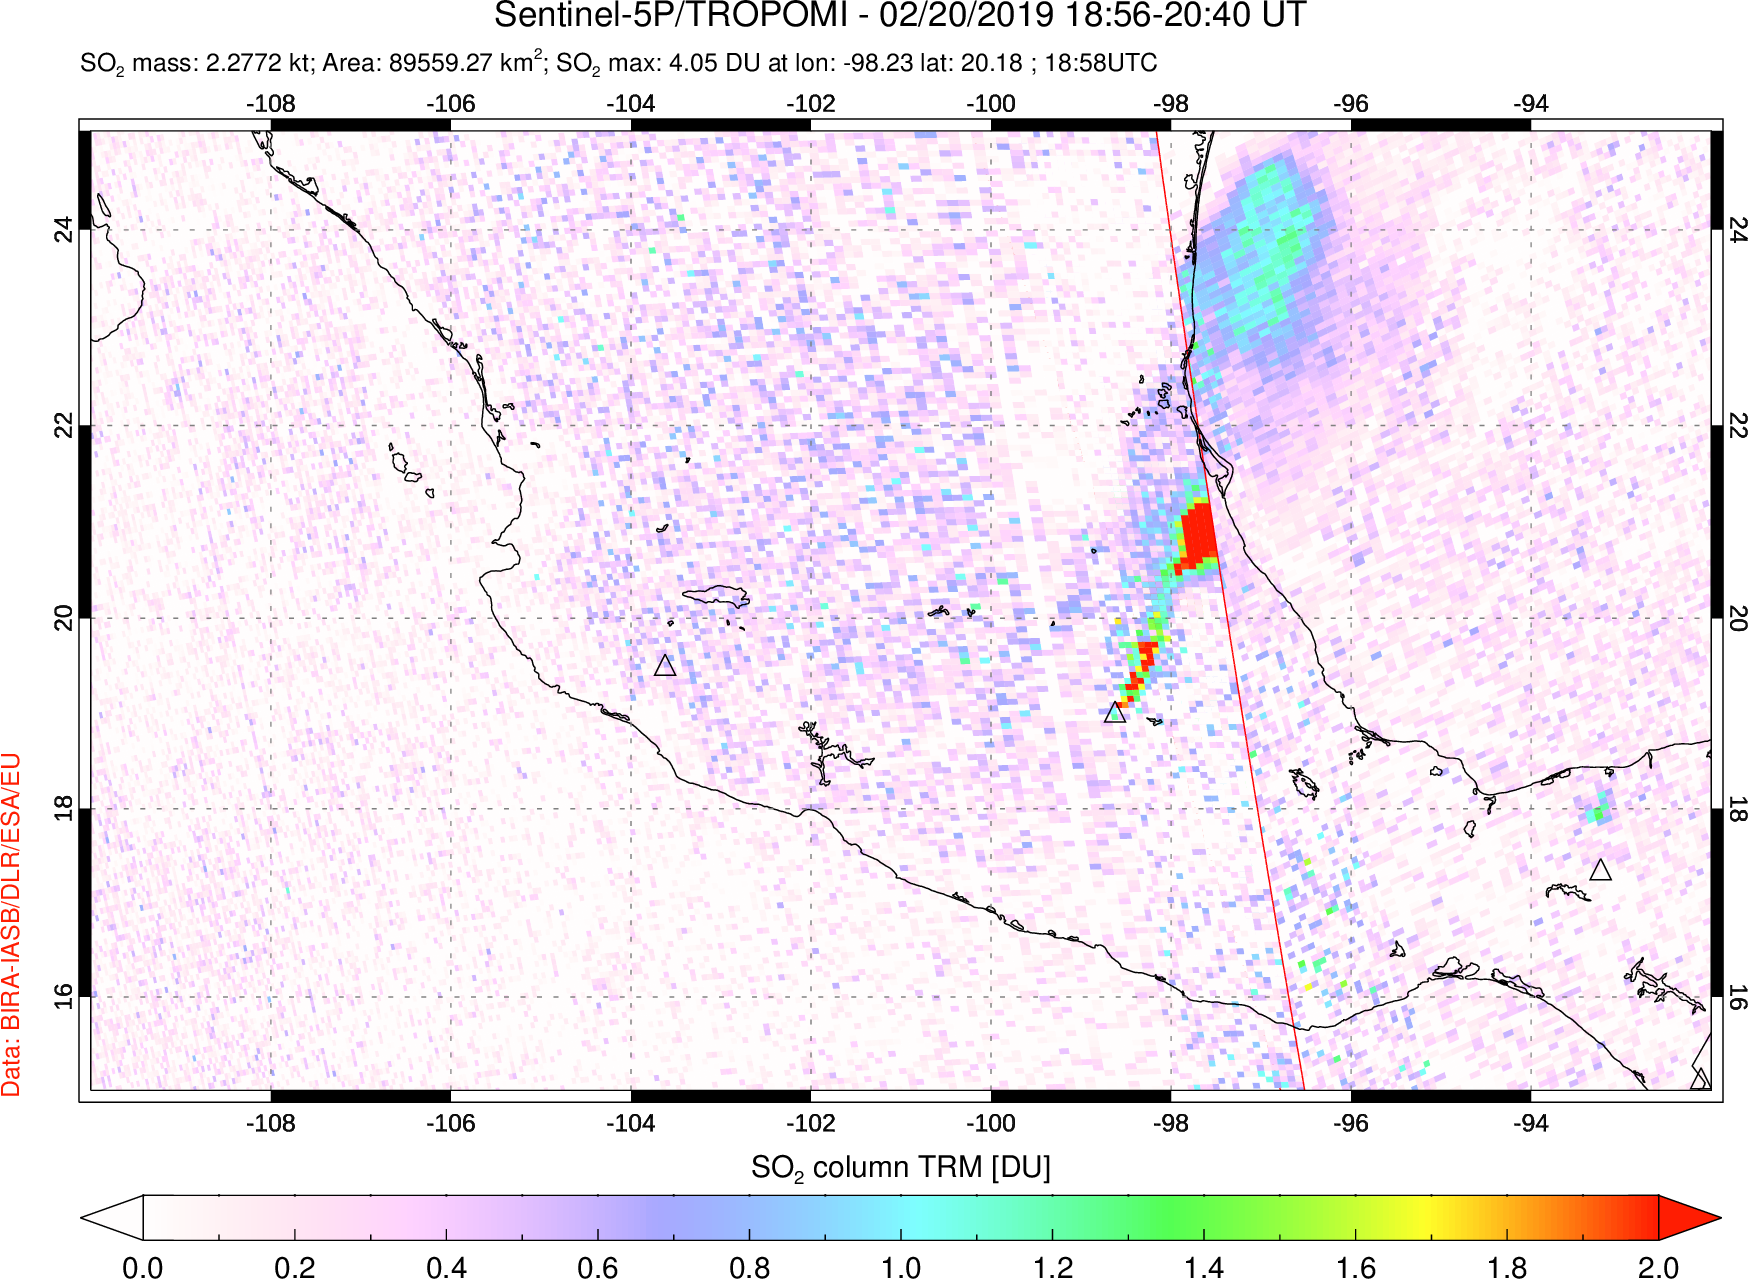 A sulfur dioxide image over Mexico on Feb 20, 2019.